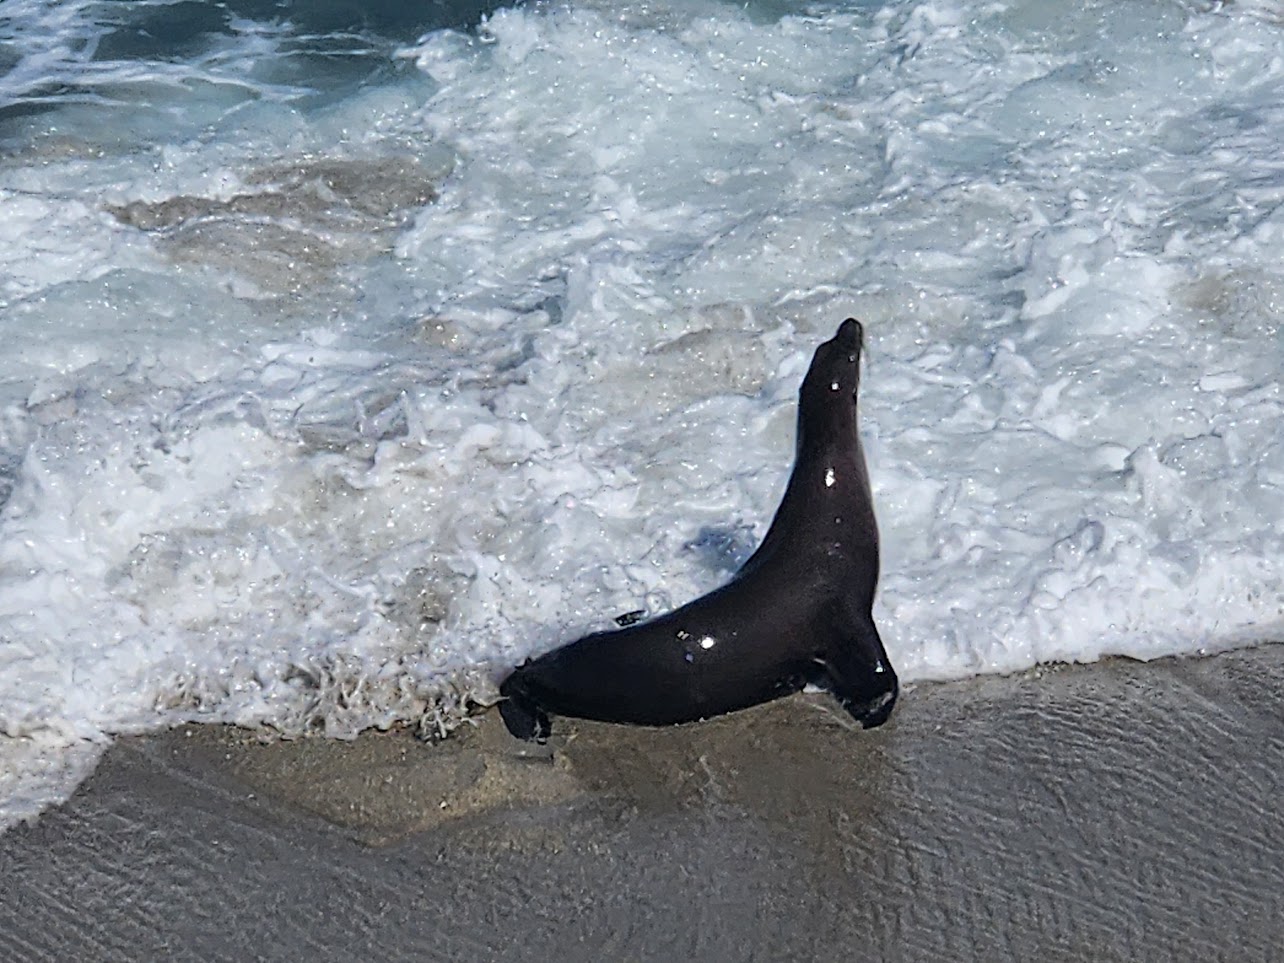 Sea lion in the waves